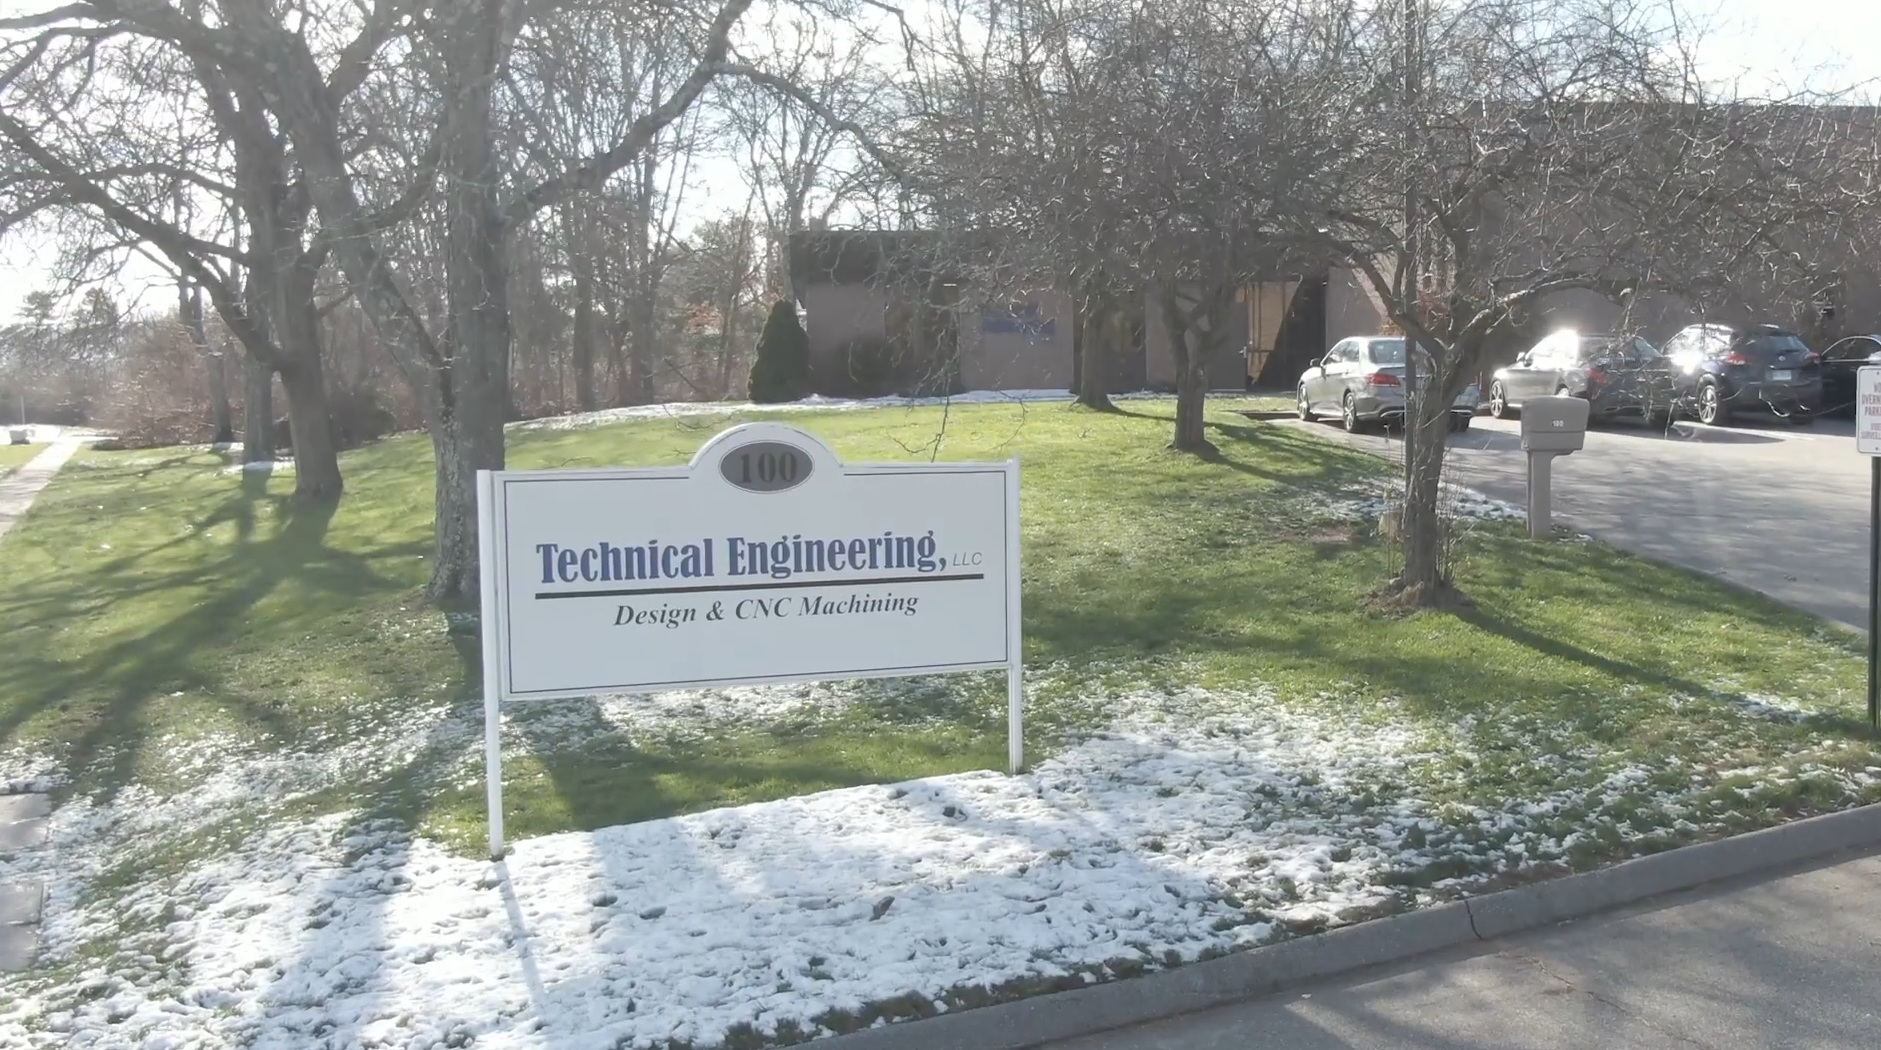 Technical Engineering Design and CNC Machining company in Manchester, Connecticut